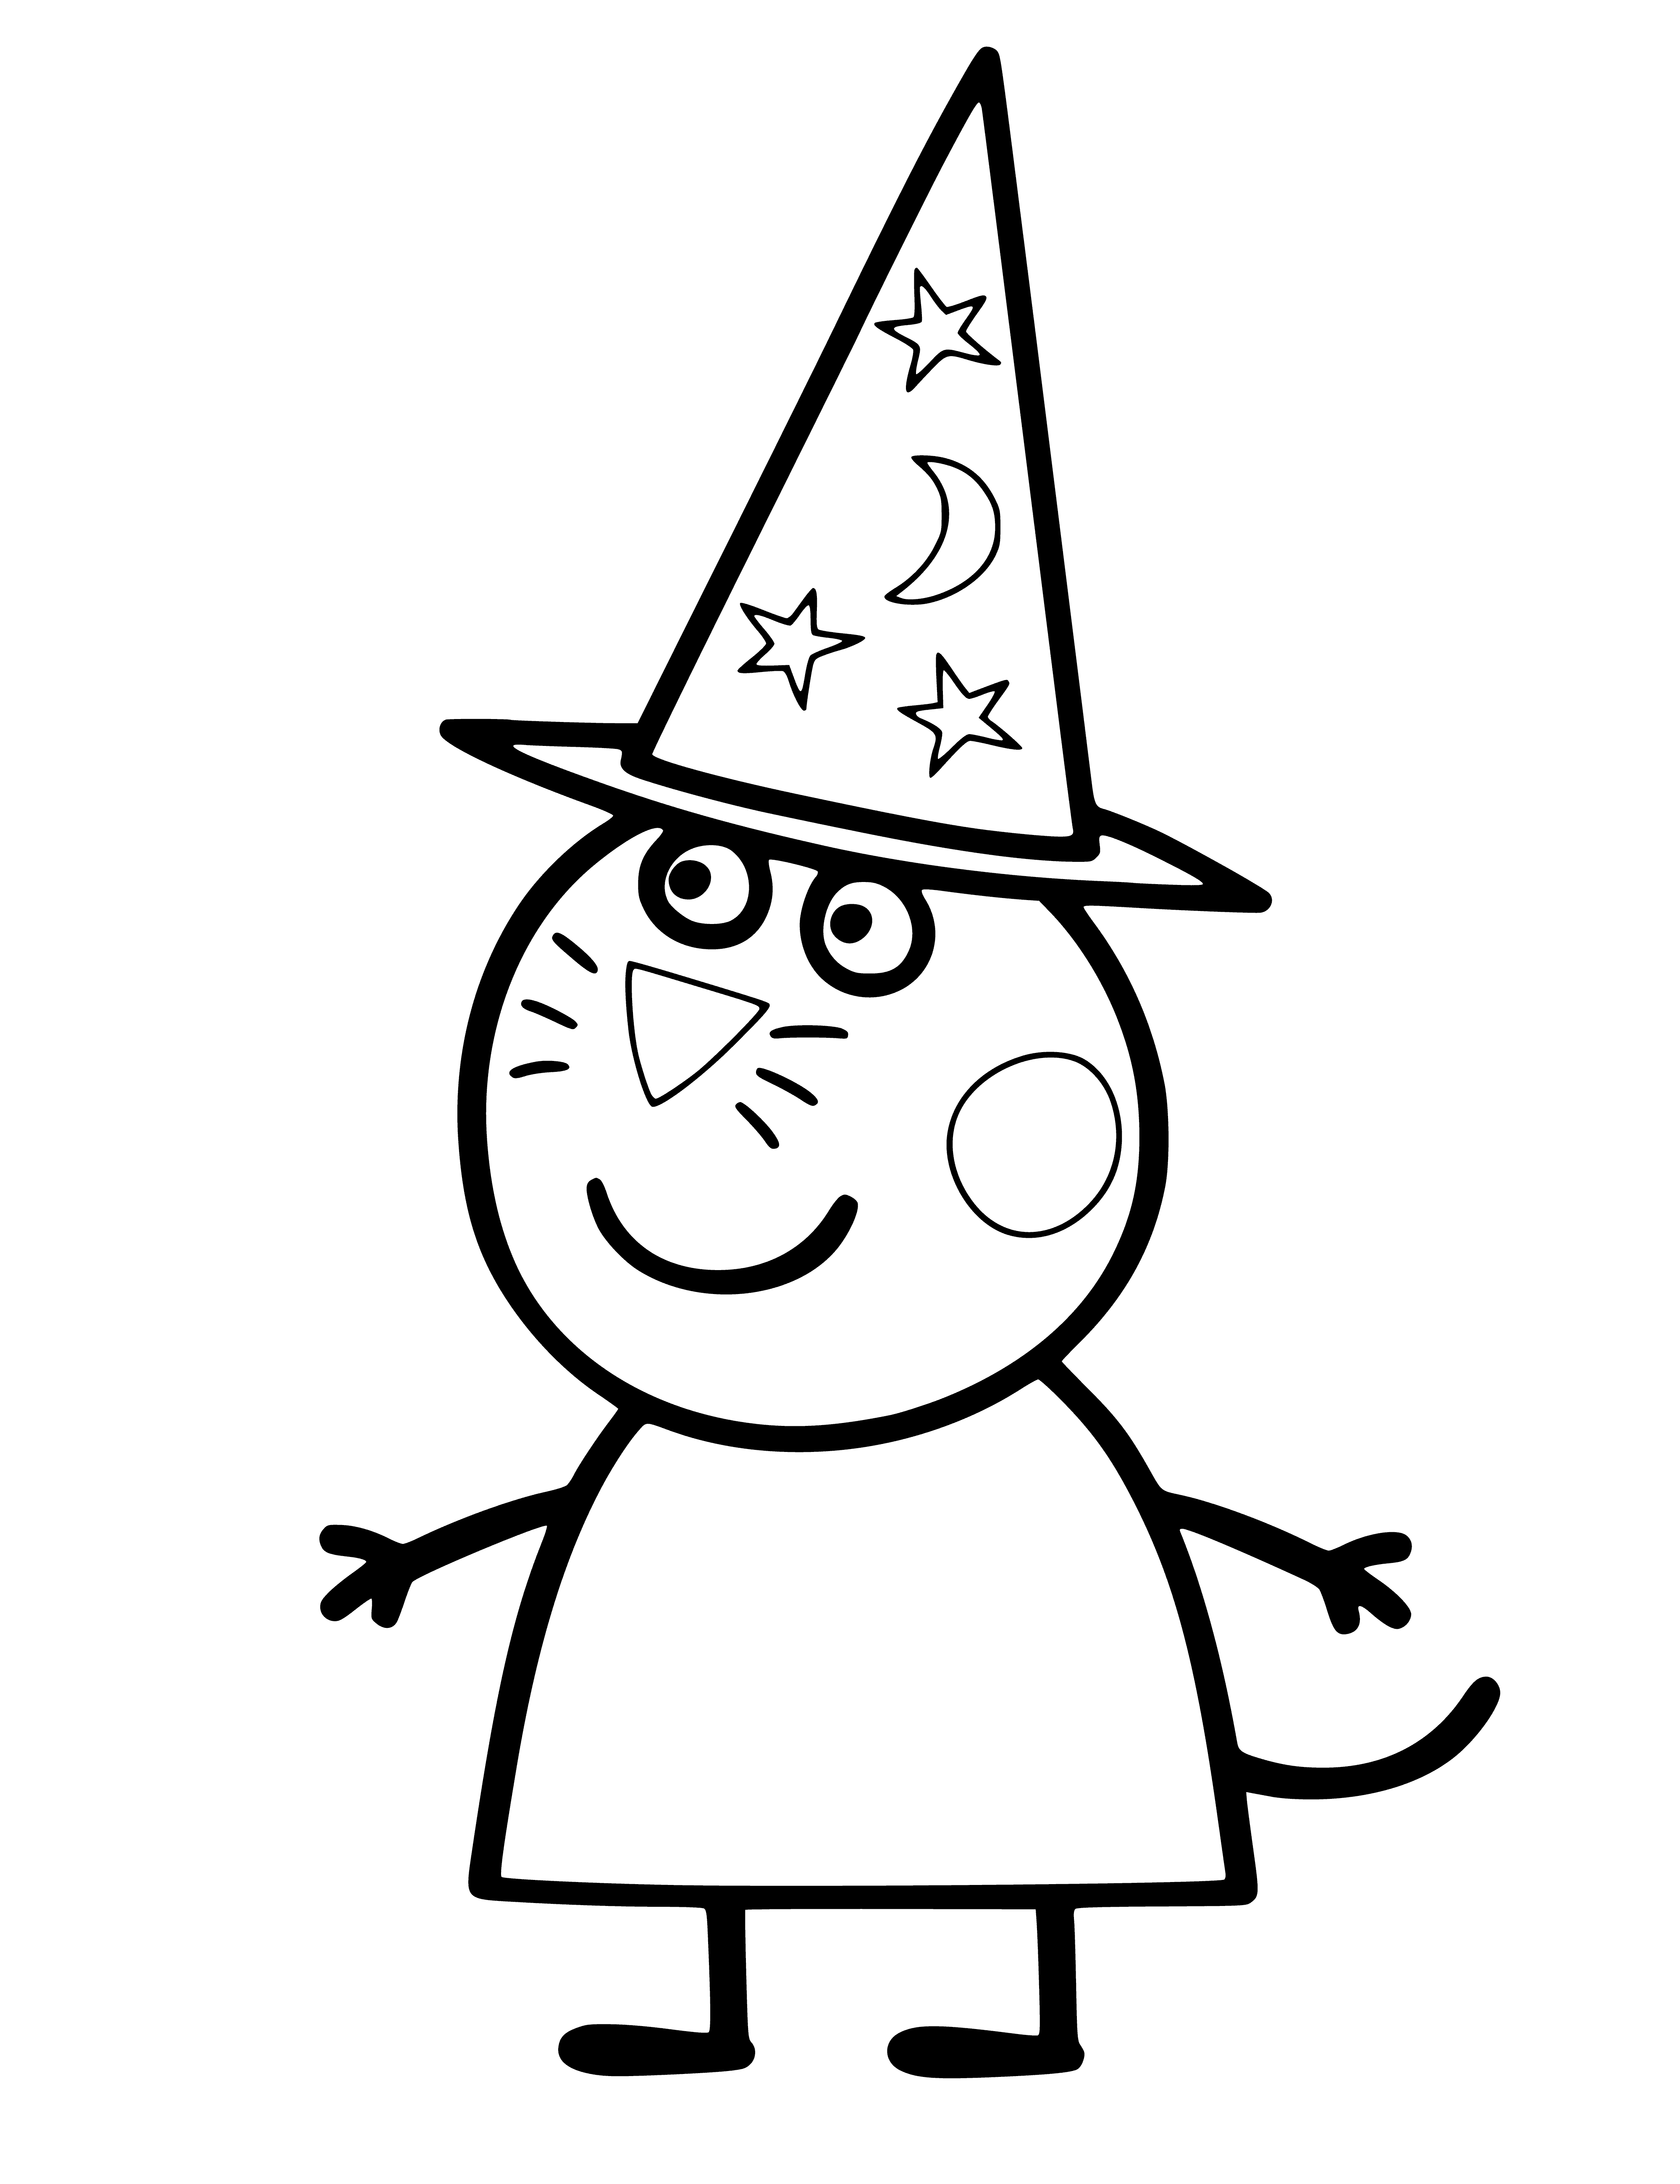 Pussy candy coloring page